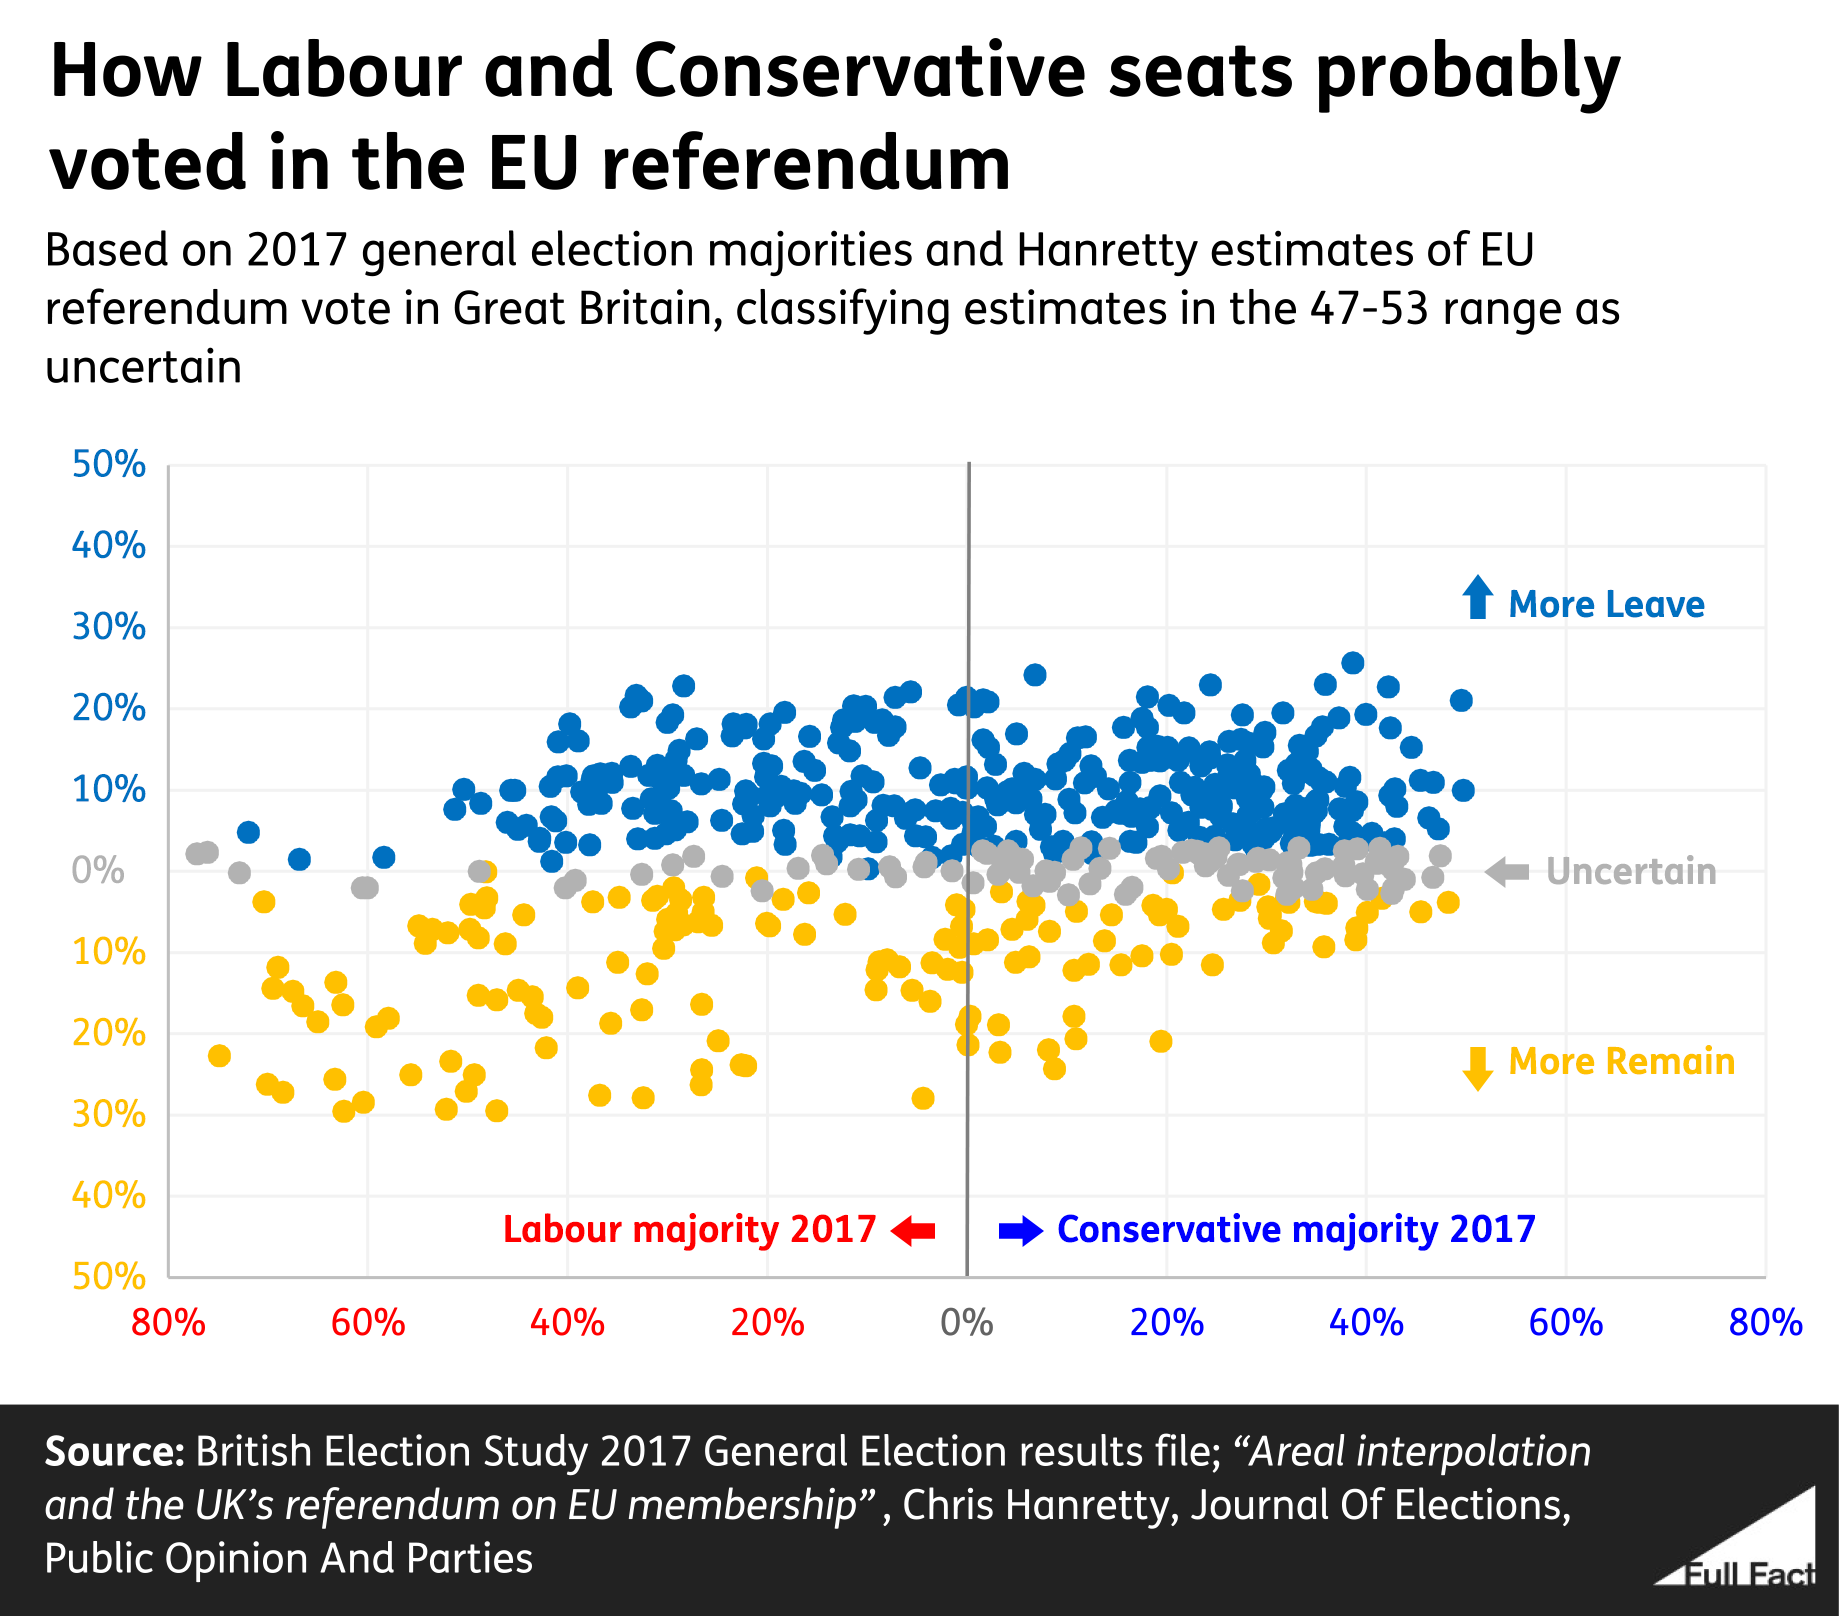 Scatter plot showing estimated Leave and Remain votes in Conservative and Labour parliamentary constituencies